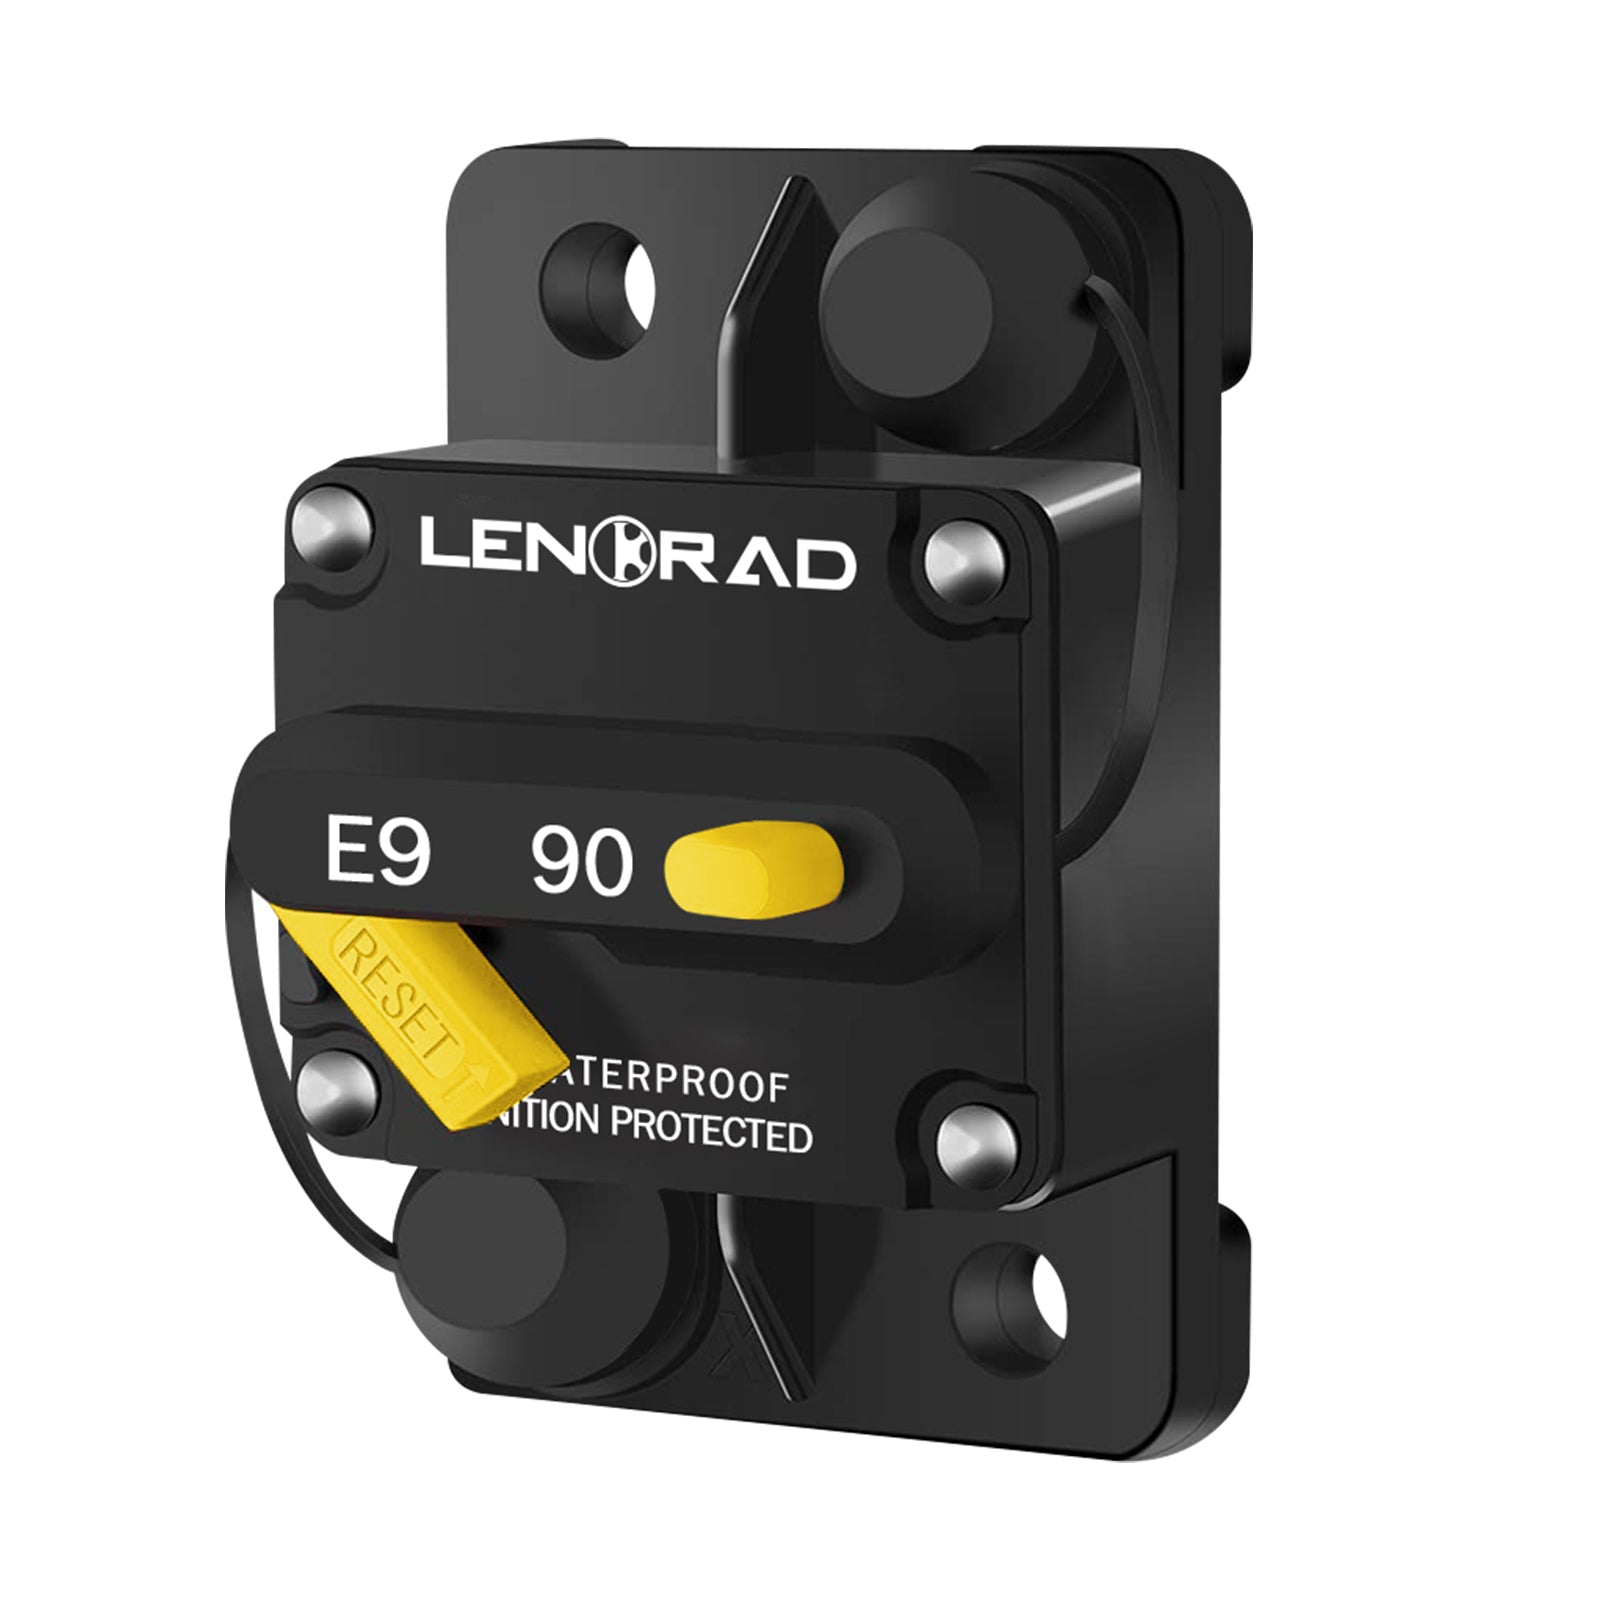 LENKRAD 90 Amp Circuit Breaker 12V with Manual Reset Switch Button for Boat Marine RV Yacht, Boat Circuit Breakers 12V - 48V DC, Waterproof(Surface Mount) - THALASSA